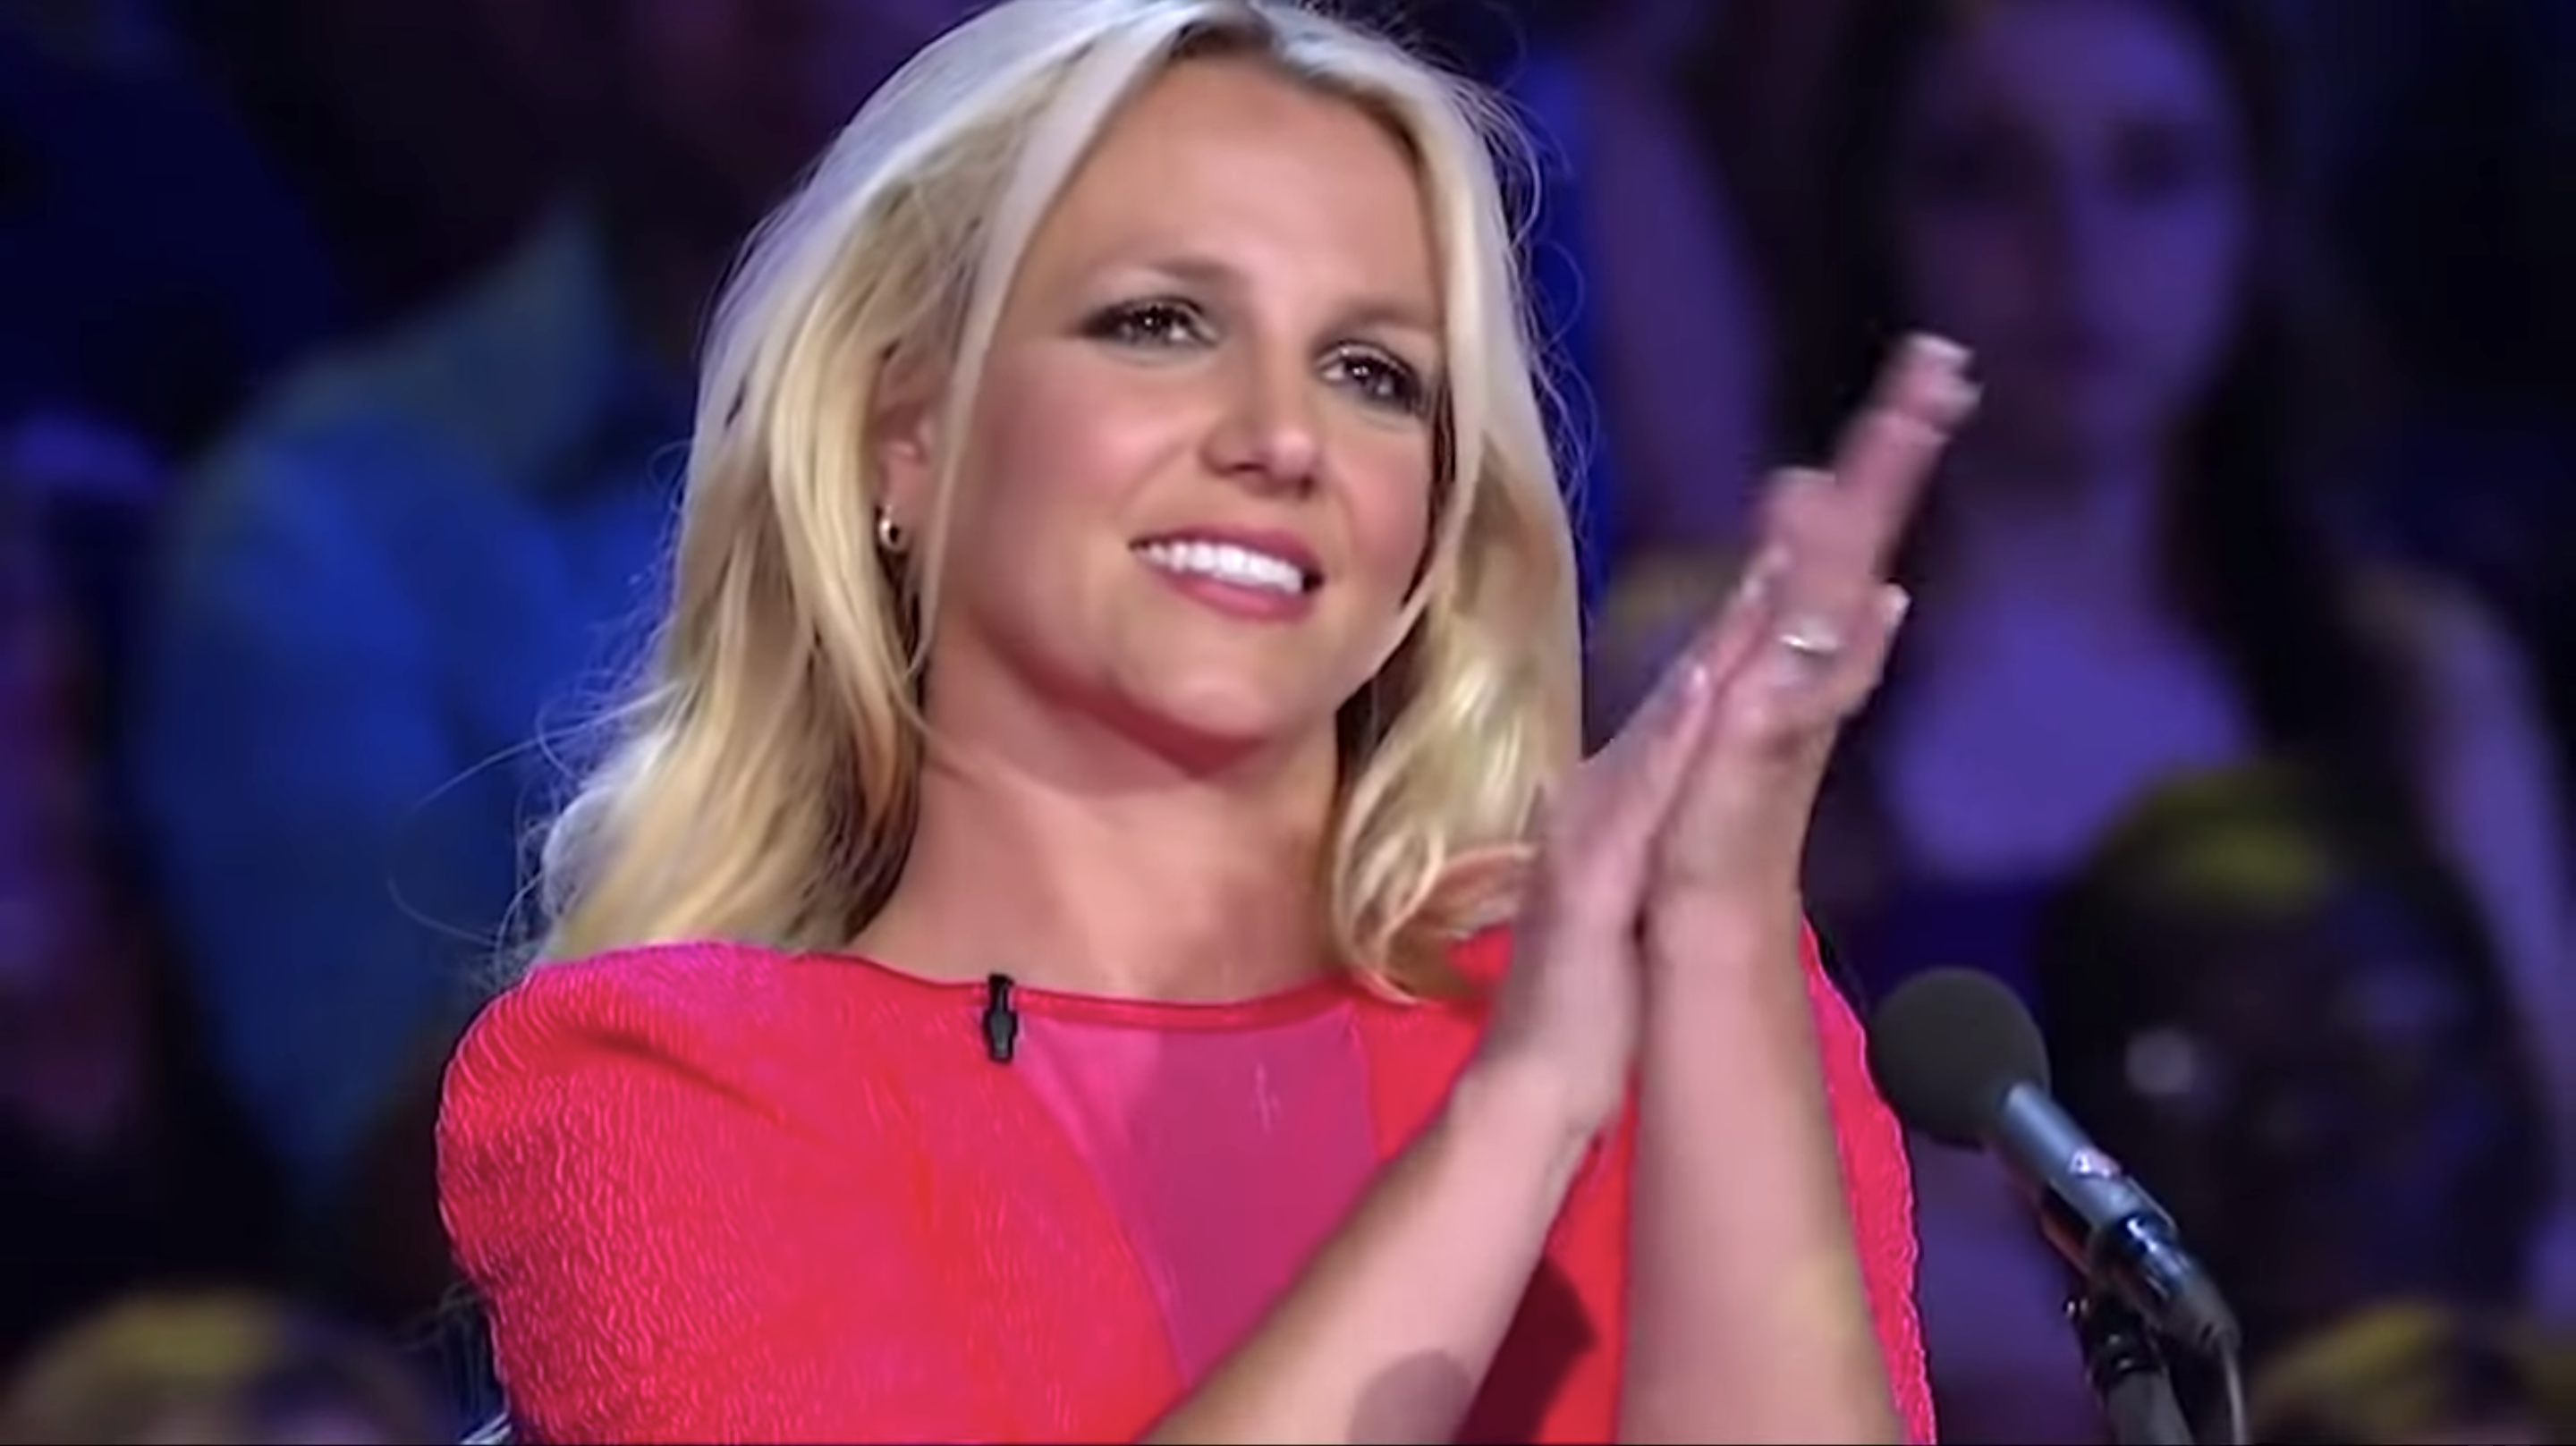 Britney Spears clapping